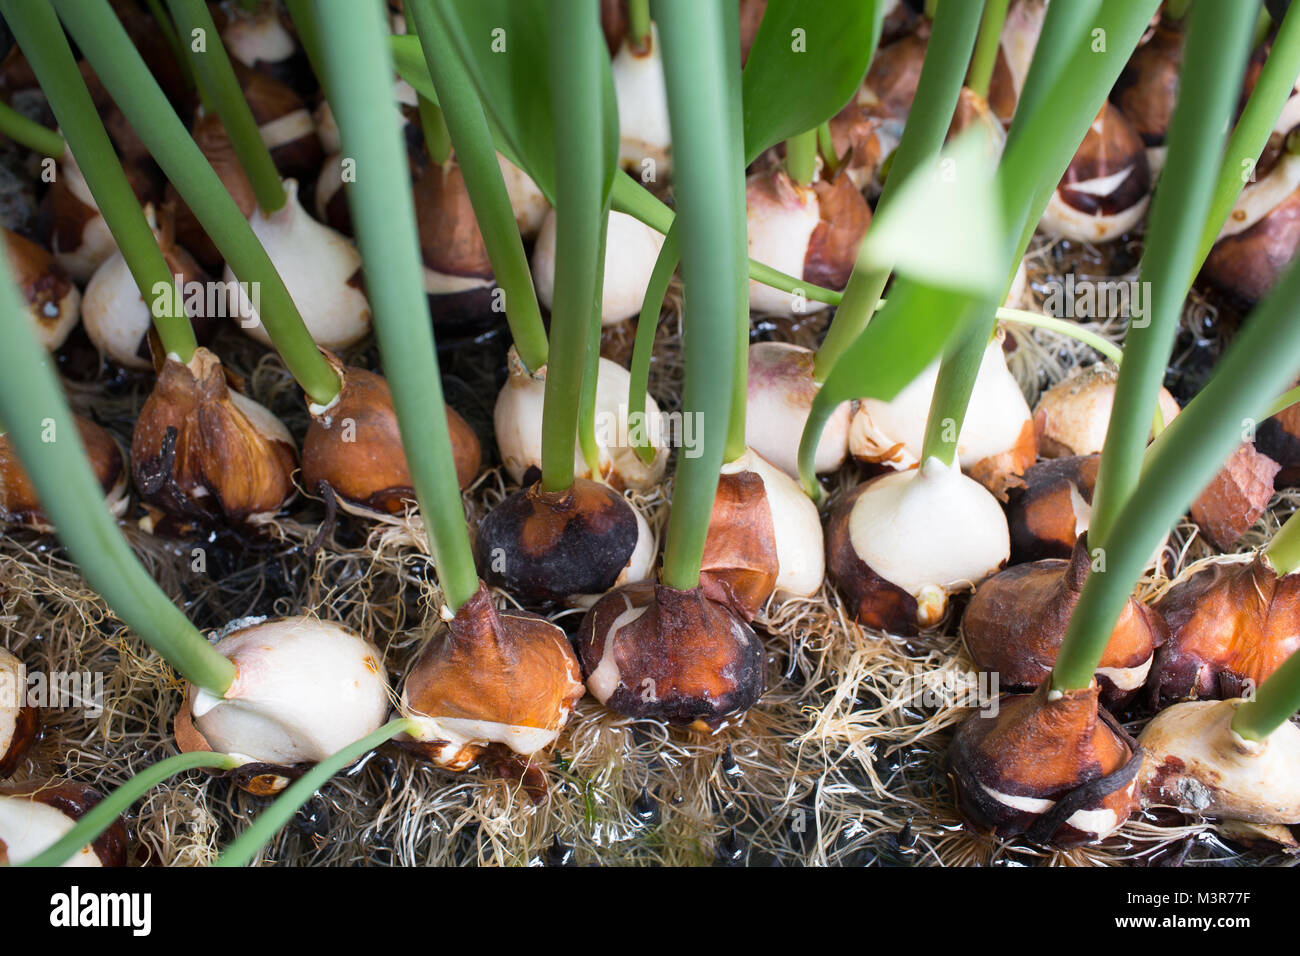 cultivation of tulips Stock Photo